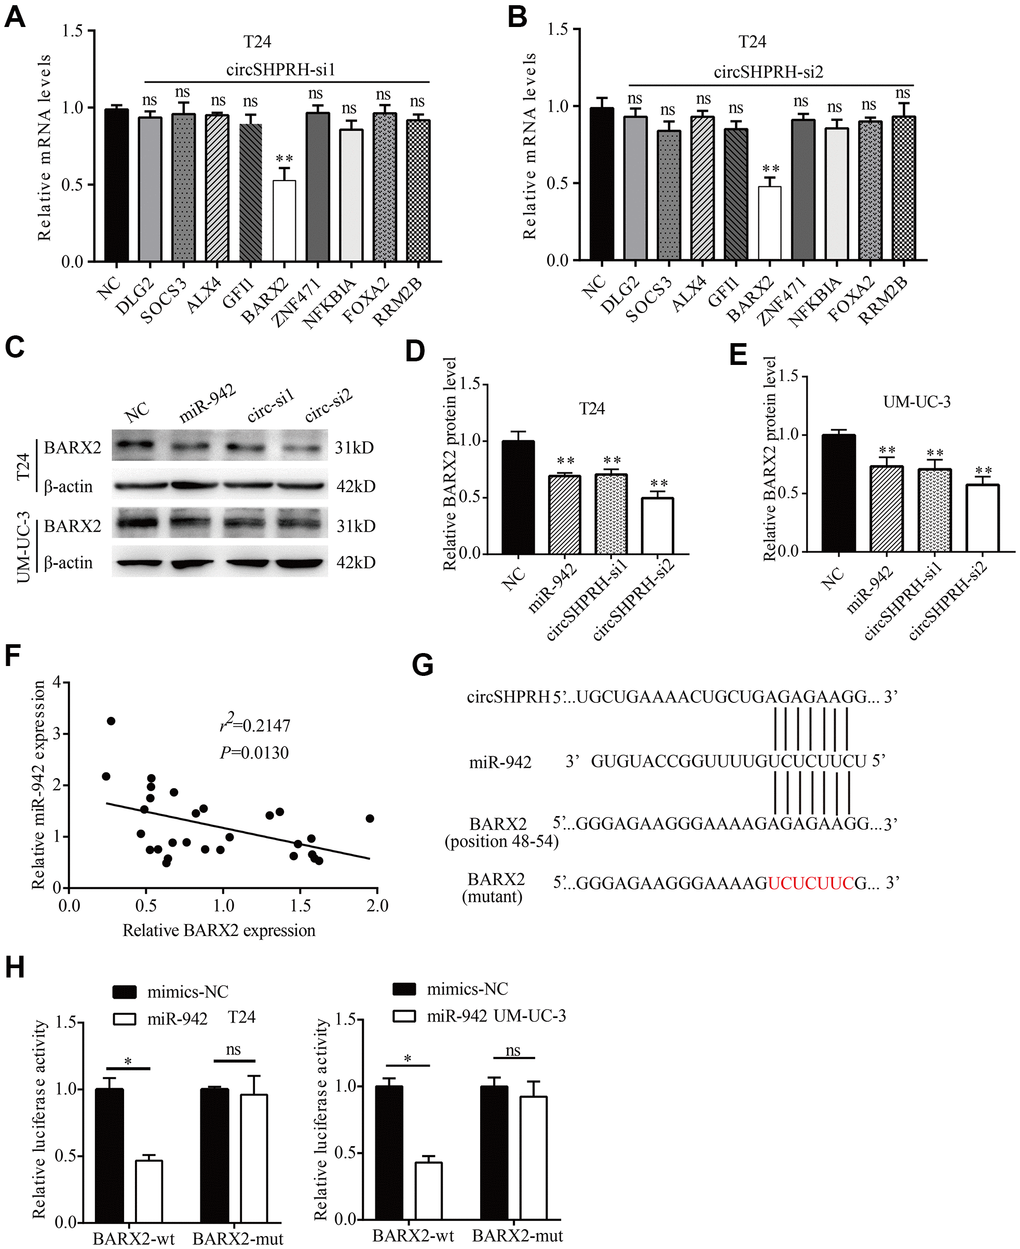 miR-942 directly targets BARX2. (A, B) The relative mRNA levels of 9 target genes of miR-942 in T24 cells transfected with si-NC or si-circSHPRH. (C–E) The effect of miR-942 overexpression or circSHPRH silencing on BARX2 expression in BCa cells, as detected by western blot. (F) Correlation between miR-942 and BARX2 mRNA expression in BCa tissues. (G) The putative sequences by which miR-942 bound to circSHPRH and the 3’-UTR of BARX2, as predicted by CircInteractome and TargetScan. (H) Luciferase activity was detected in T24 and UM-UC-3 cells transfected with the wild-type (wt) BARX2-3’-UTR (or mutant) and miR-942 mimics or mimics-NC.